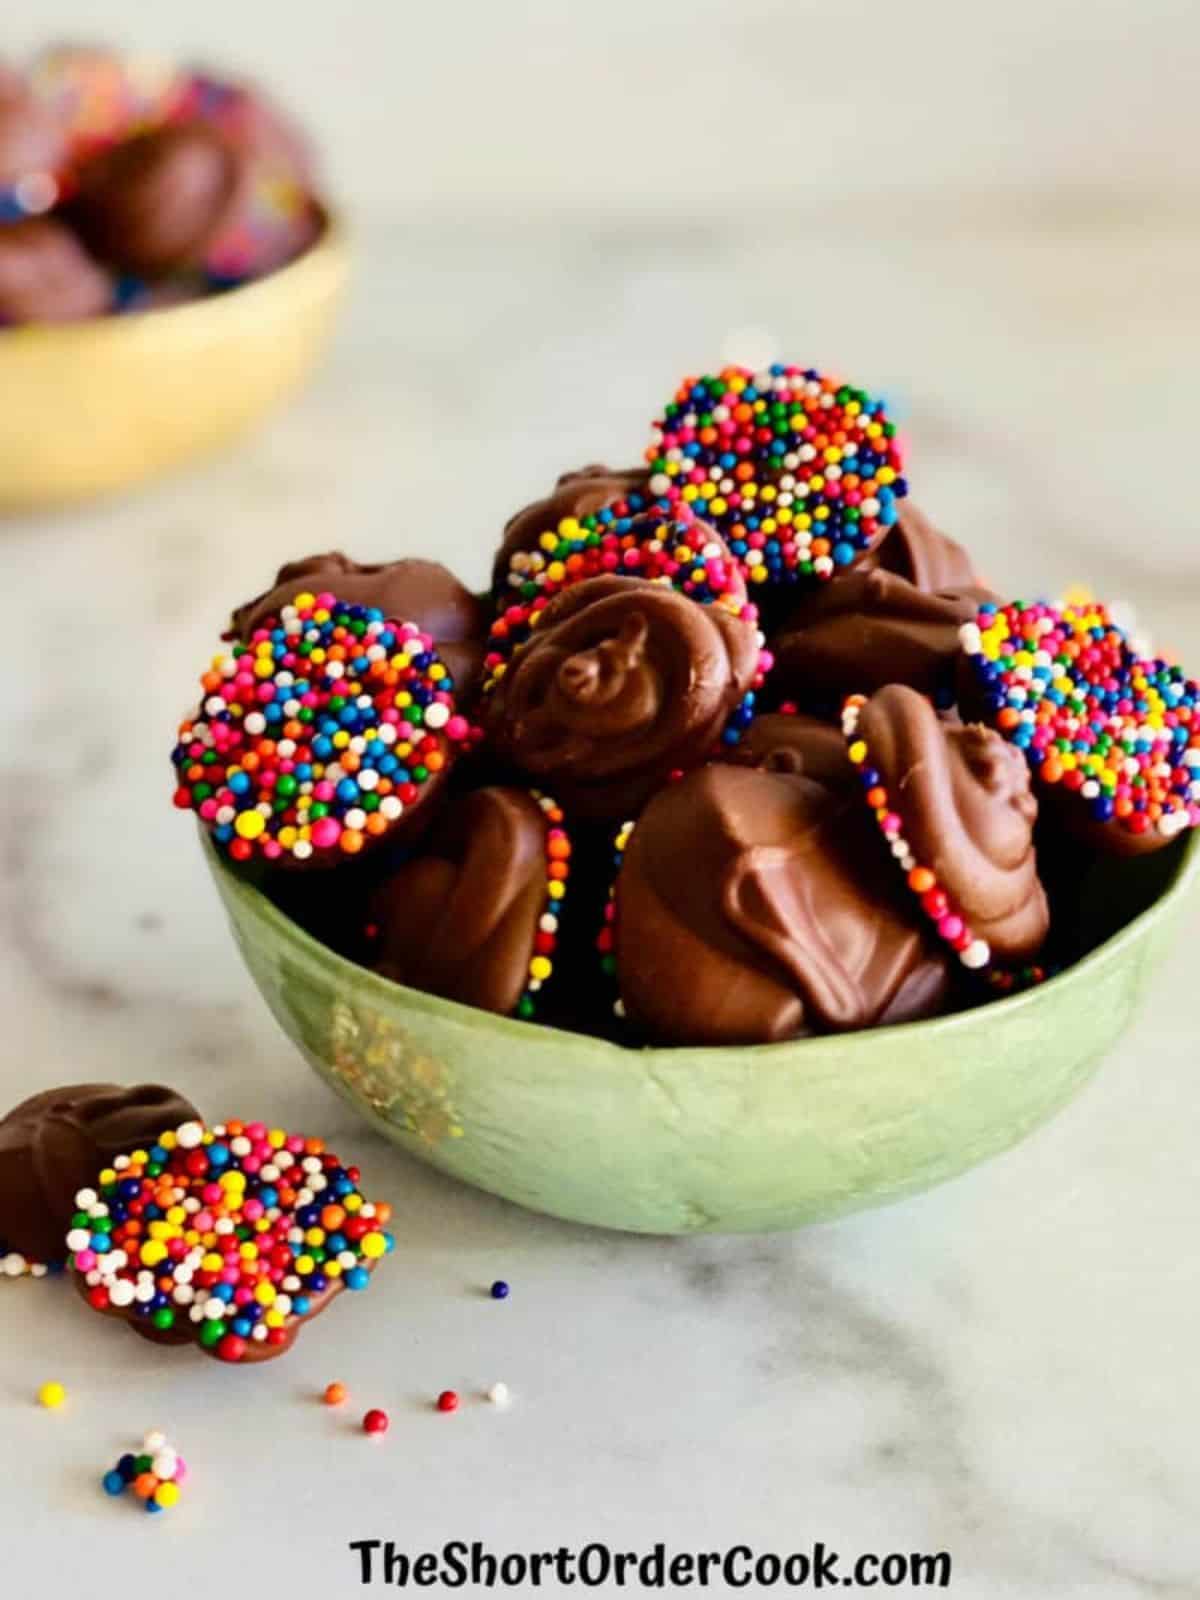 Chocolate sprinkled with Nonpareils Candy.